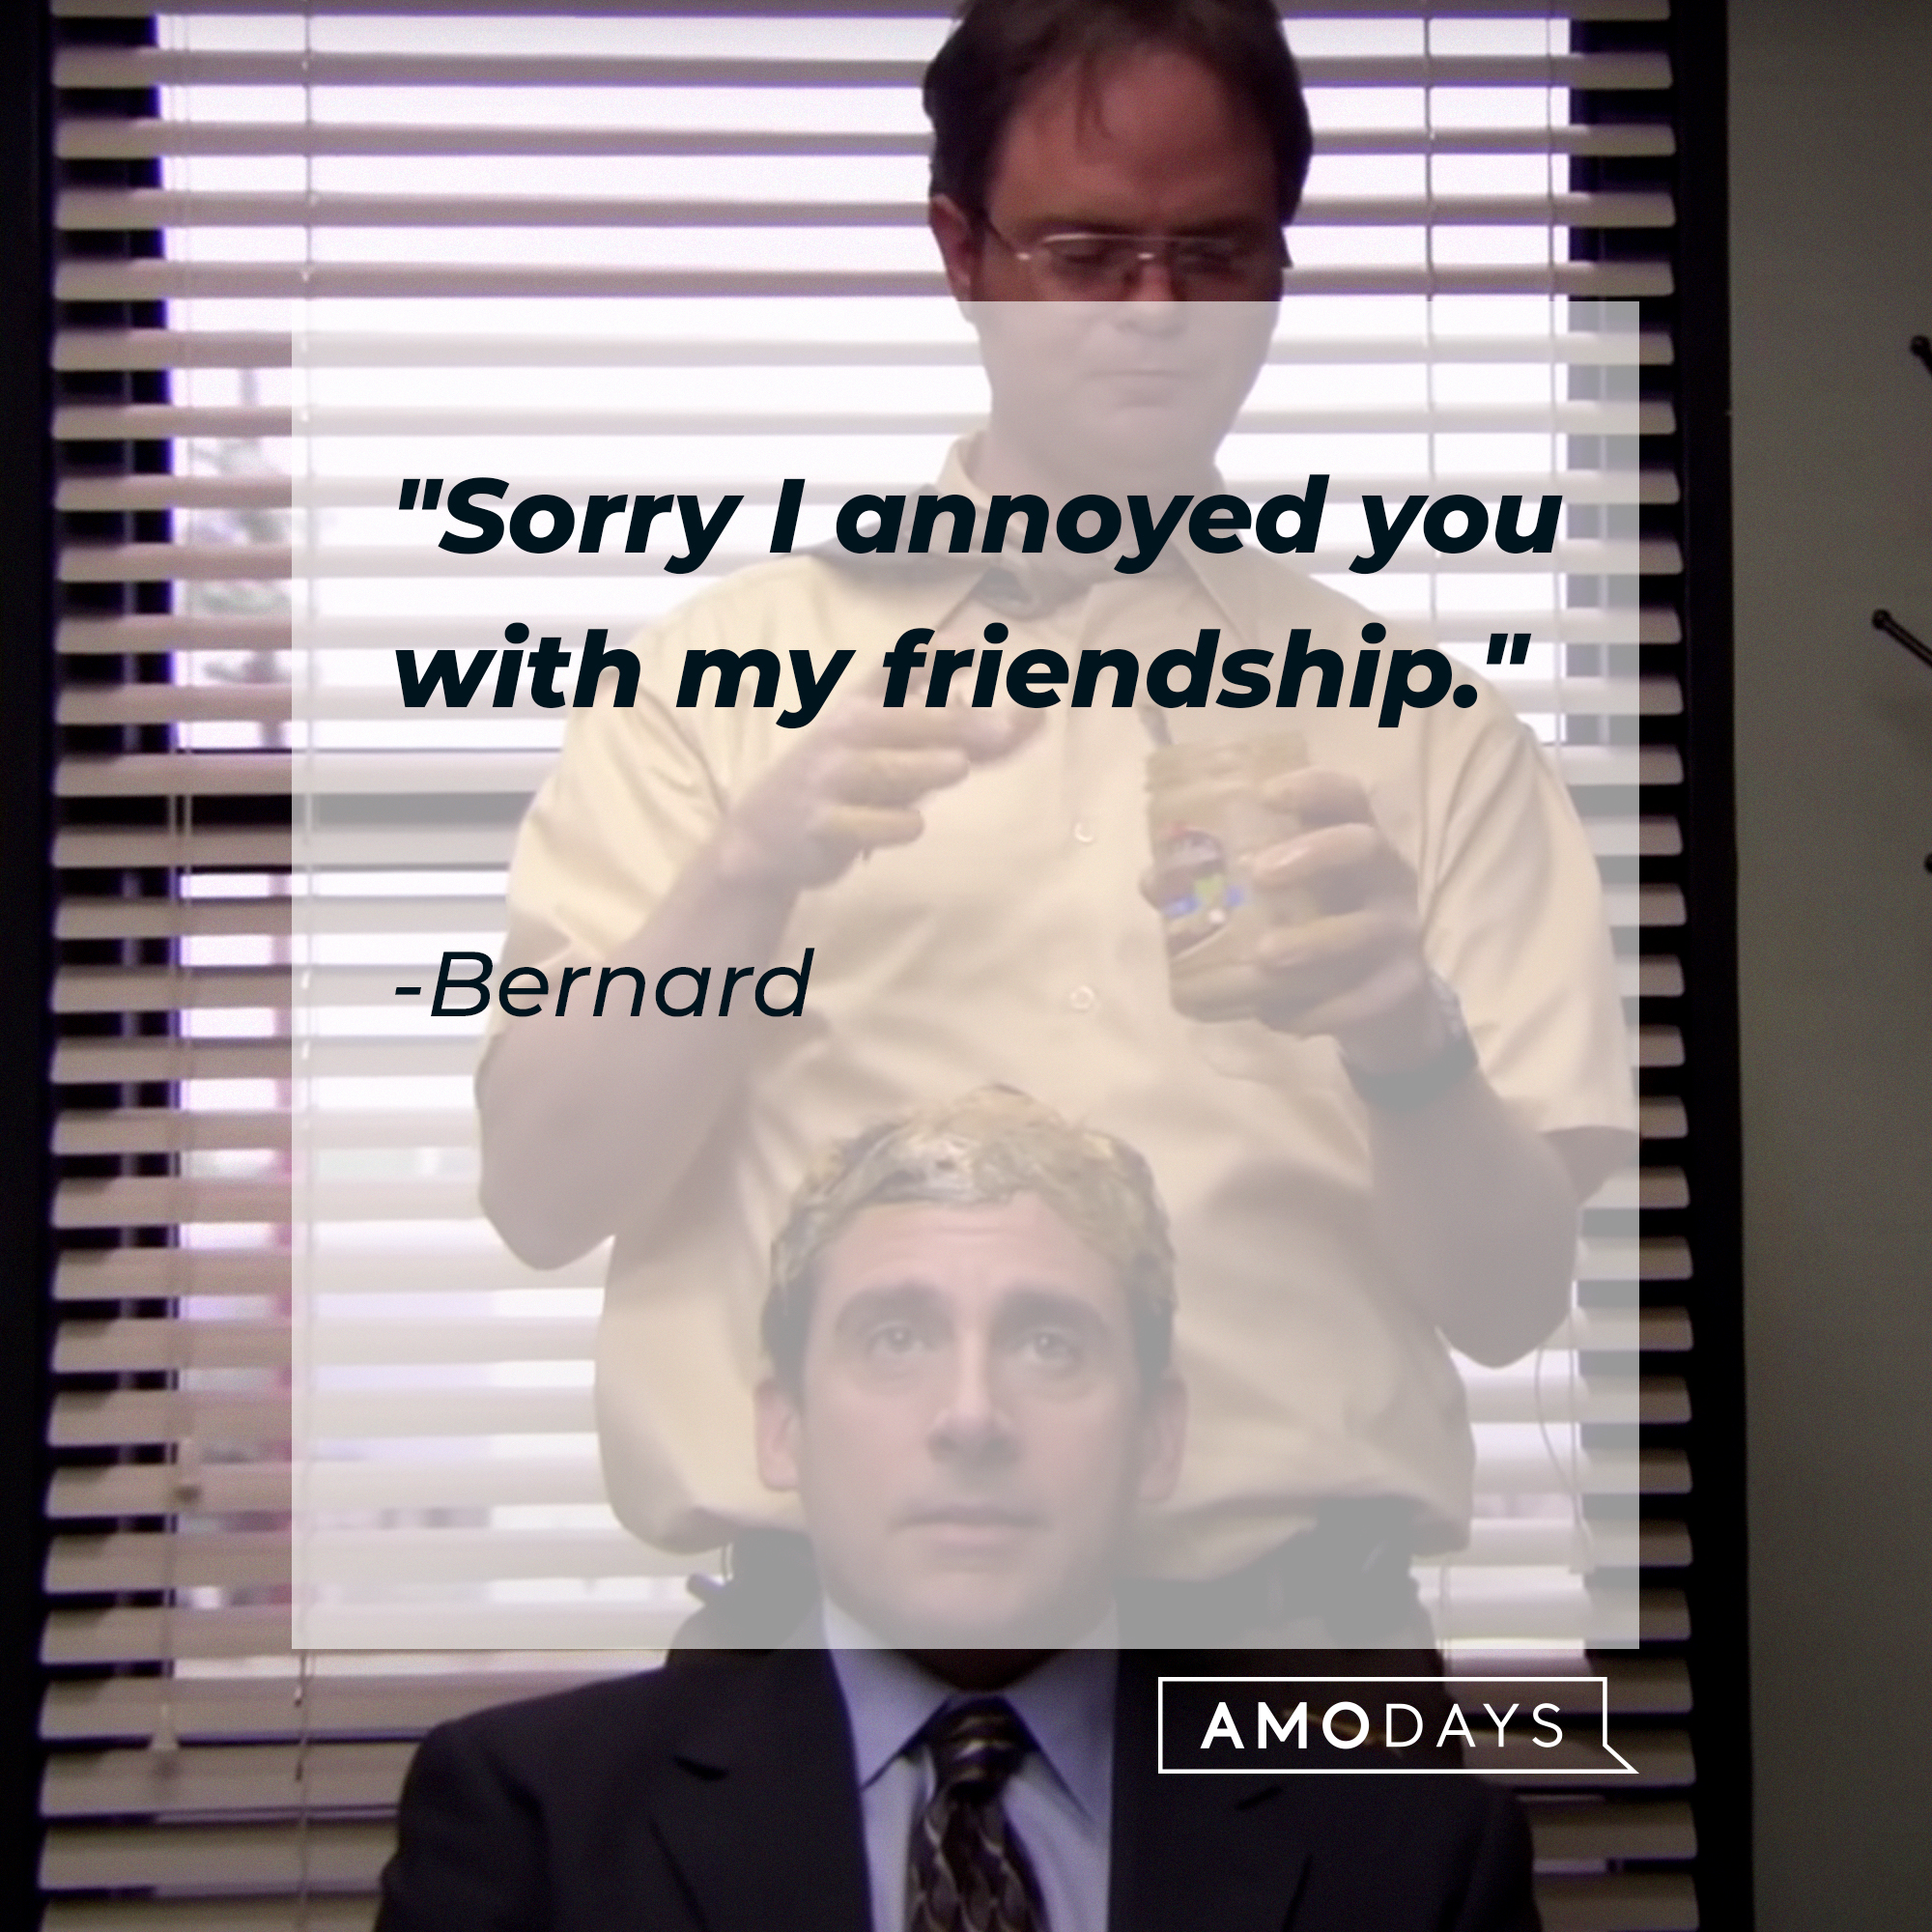 Bernard's quote: "Sorry I annoyed you with my friendship" | Source: Youtube.com/TheOffice